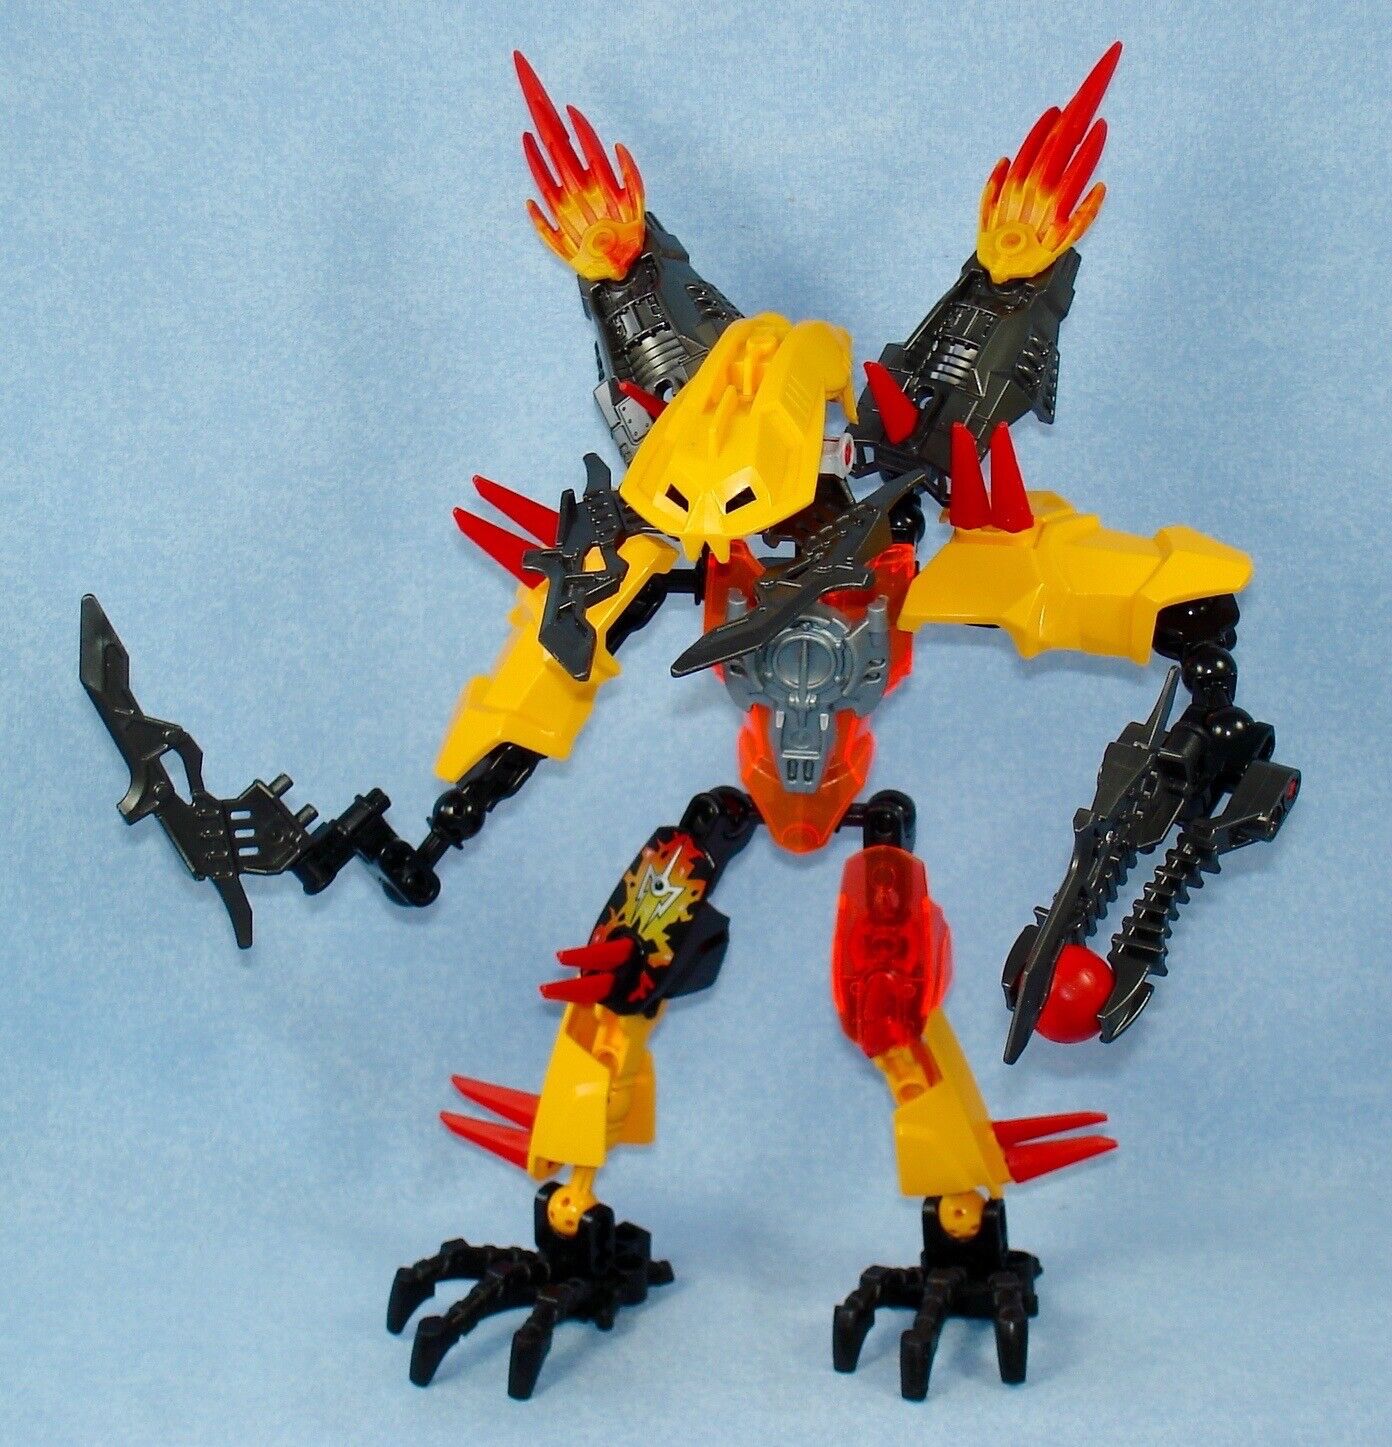 Lego 2193 JETBUG - Hero Factory Villain Warrior - Complete Bionicle with Weapons